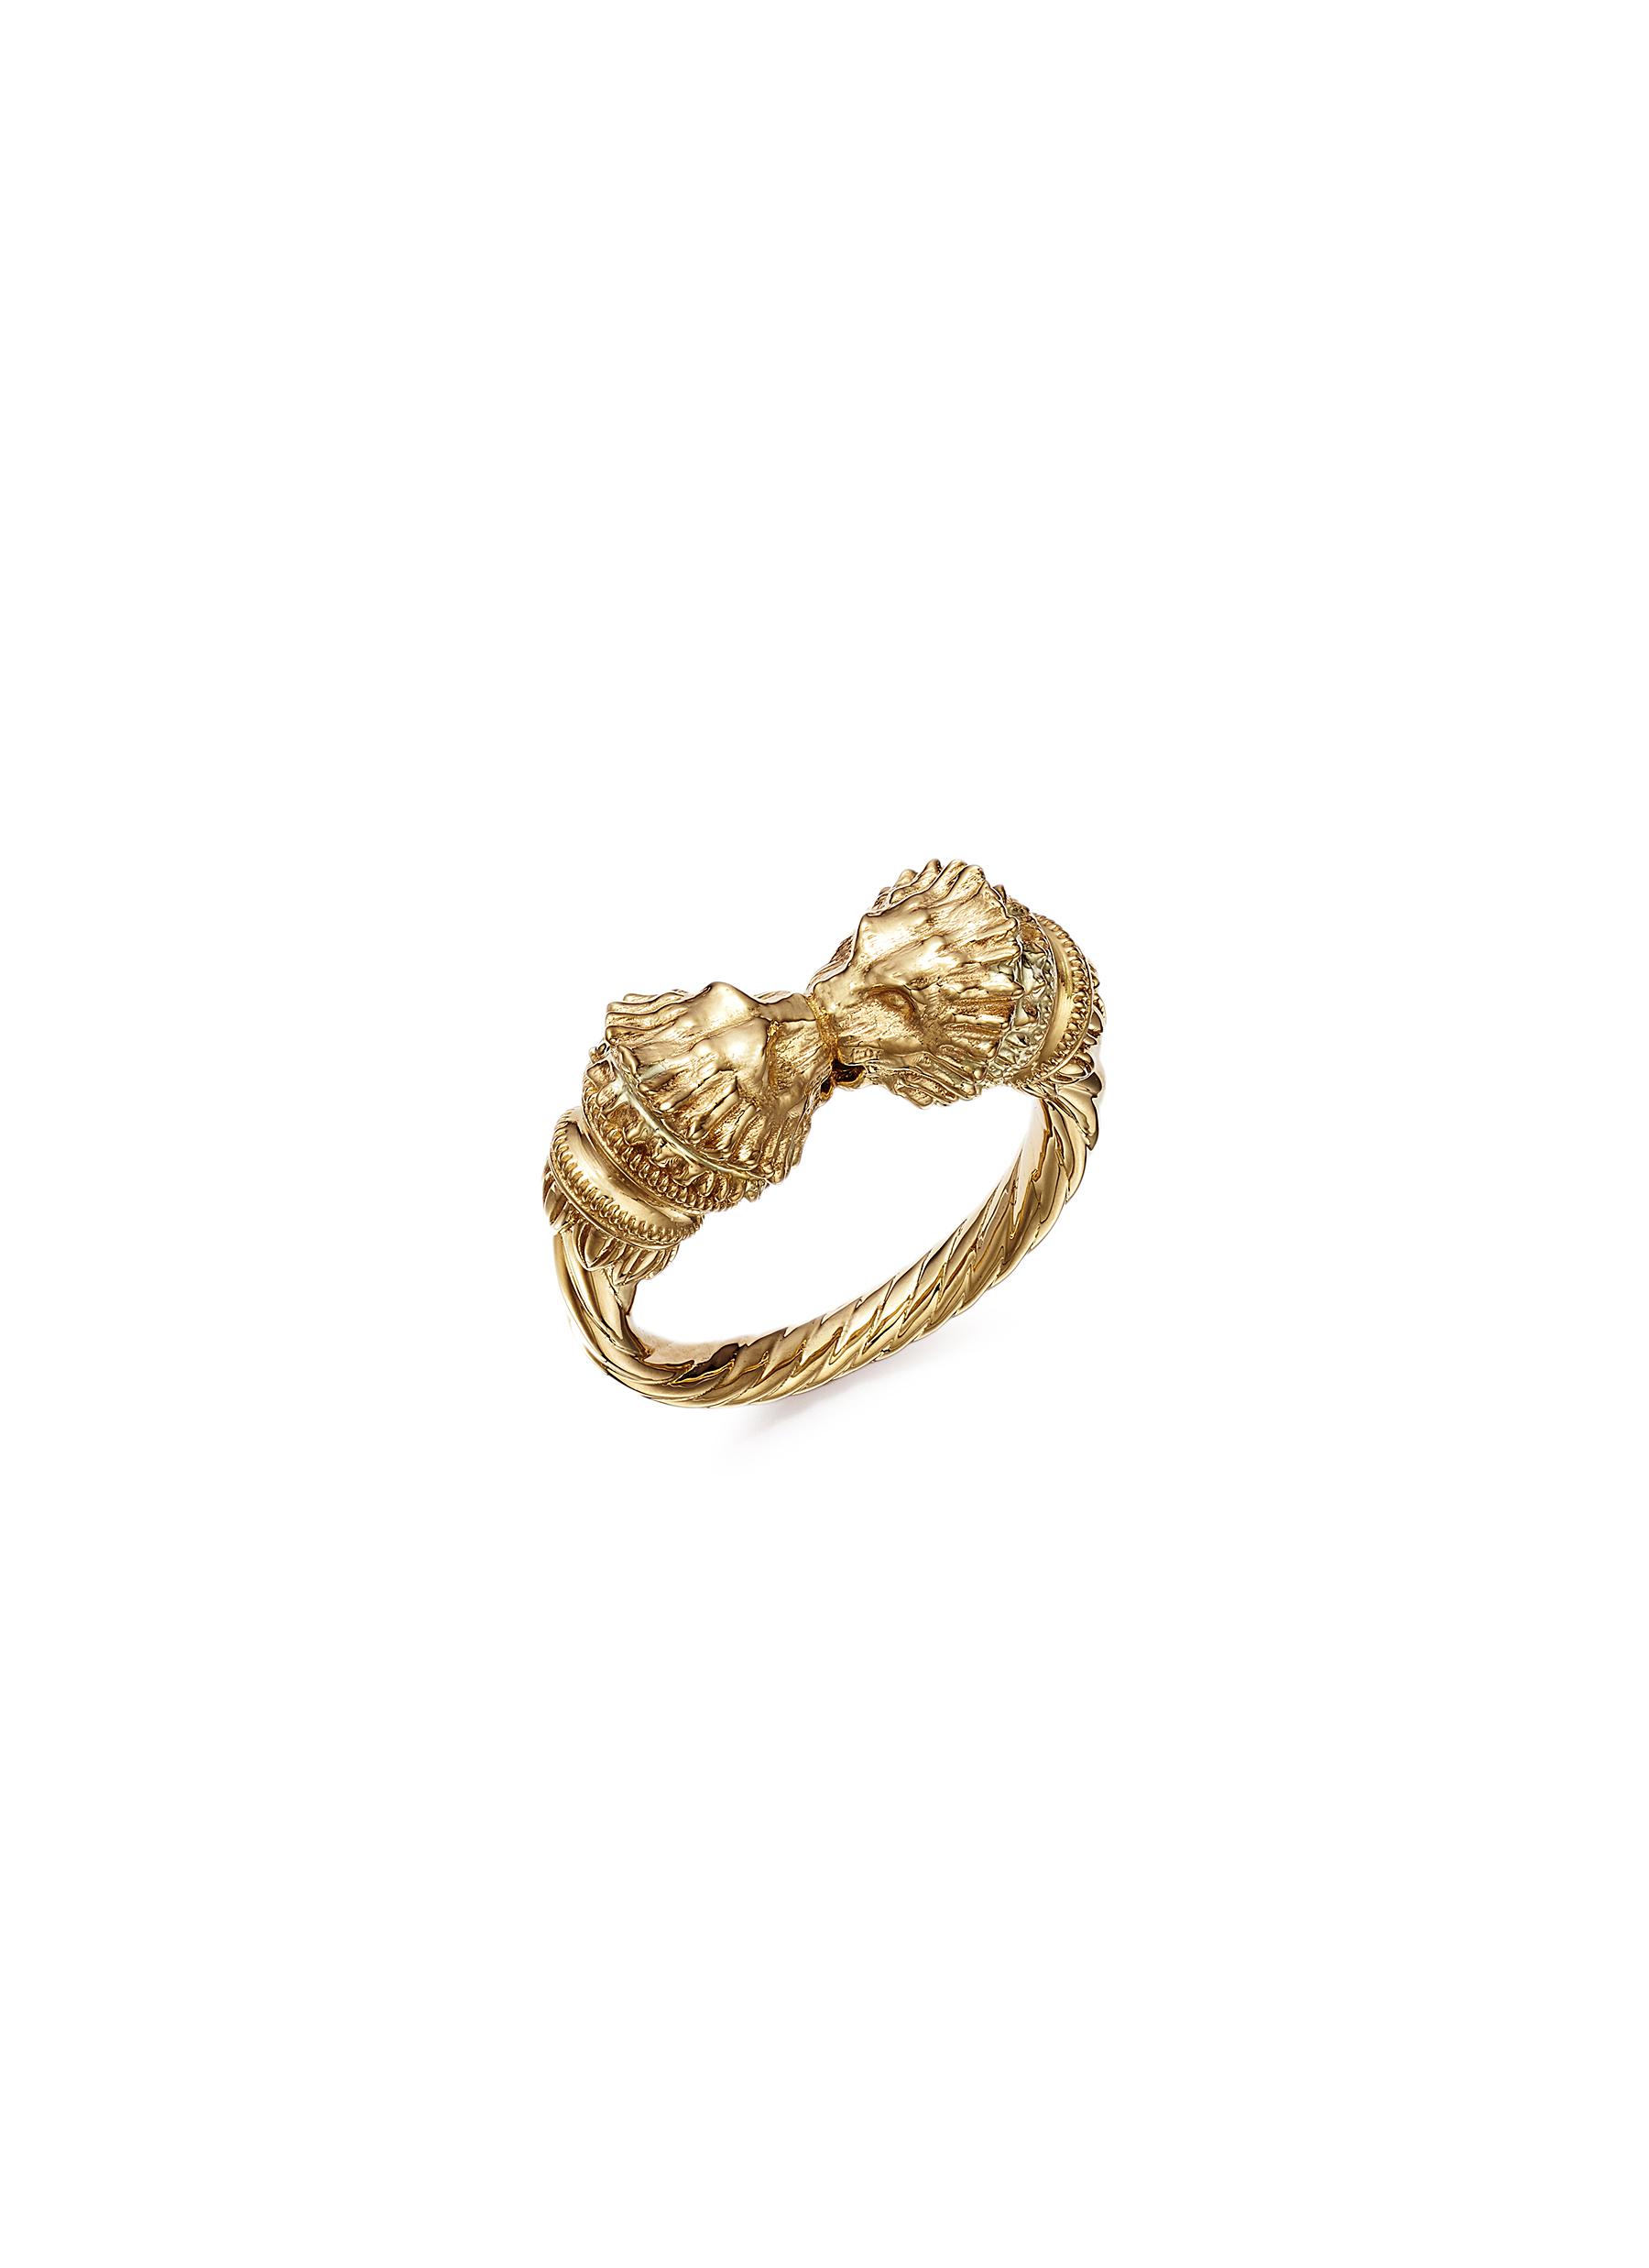 FUTURA ‘Lion' 18k fairmined ecological gold ring